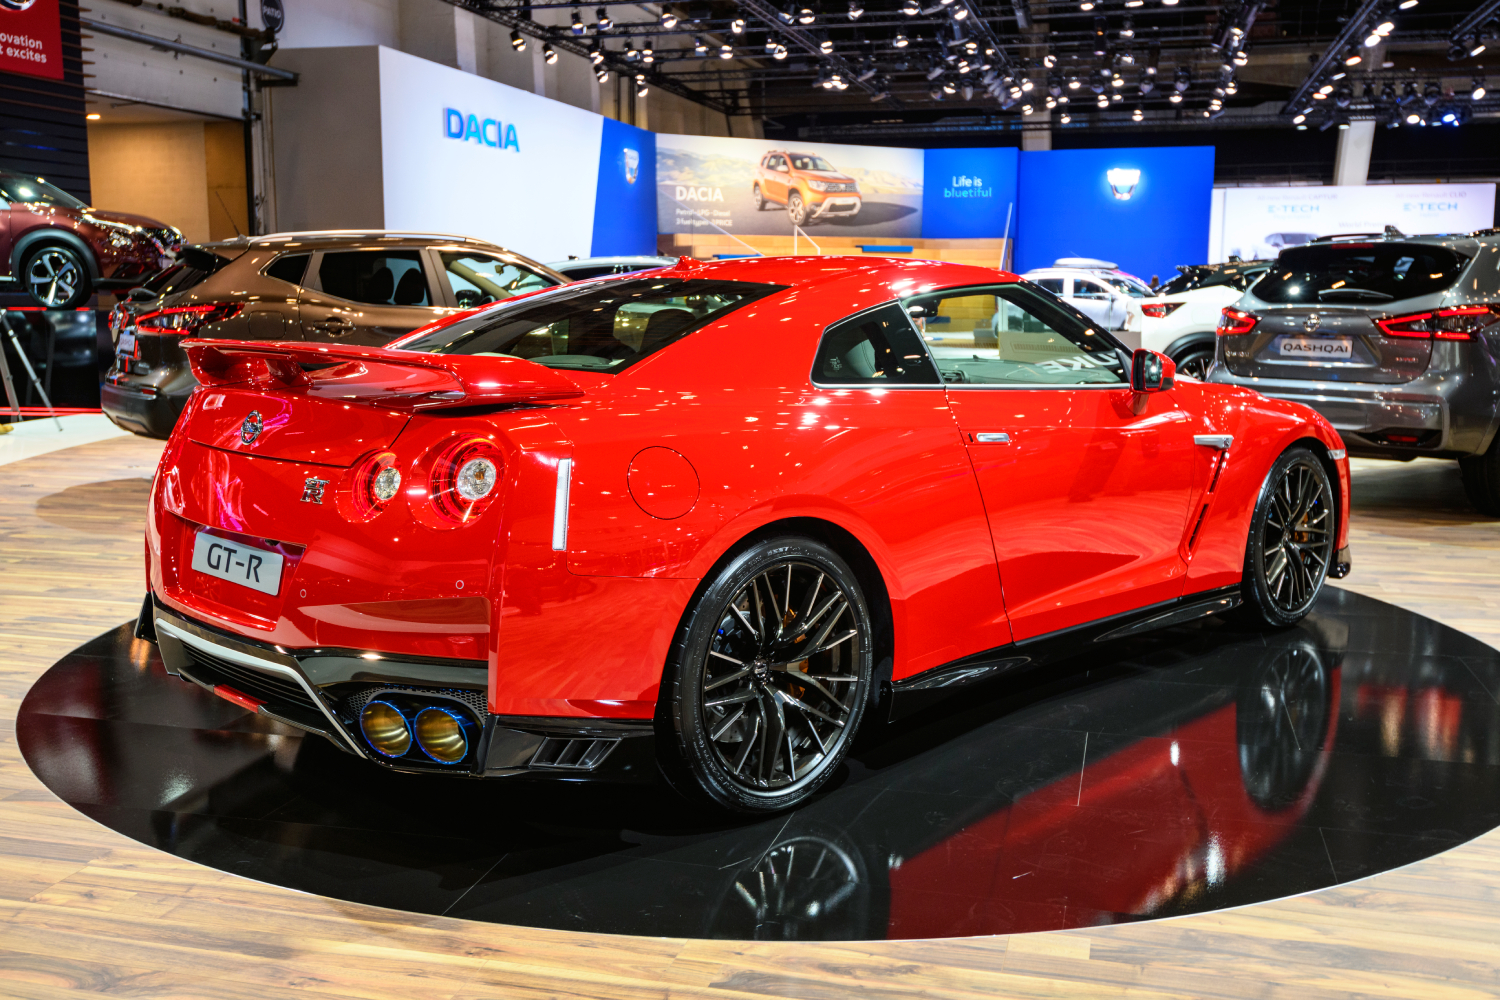 The Nissan GT-R Nismo is one of the most expensive new cars to insure